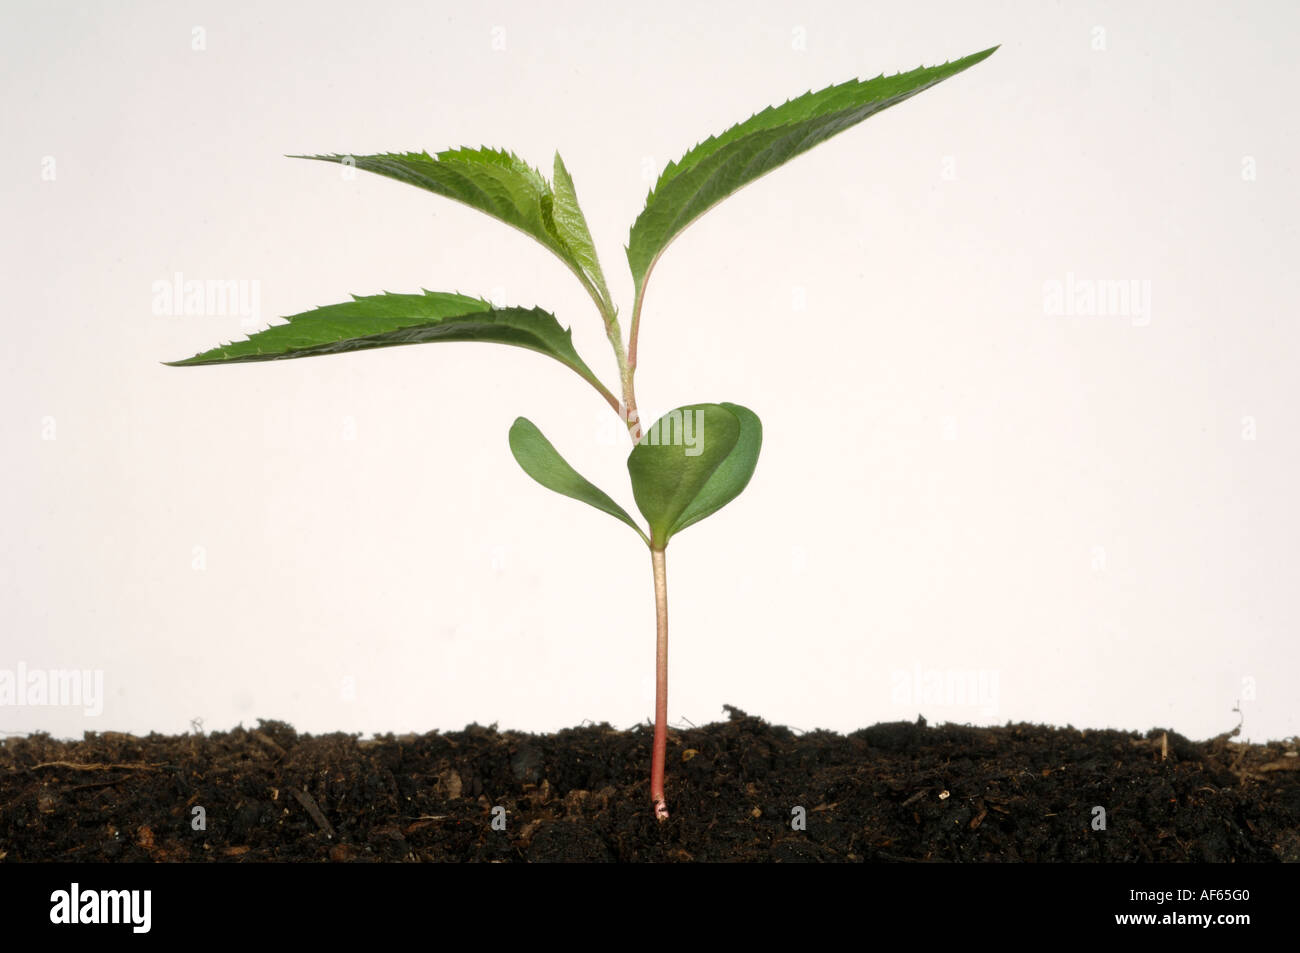 A seedling apple tree with cotyledons and three true leaves Stock Photo